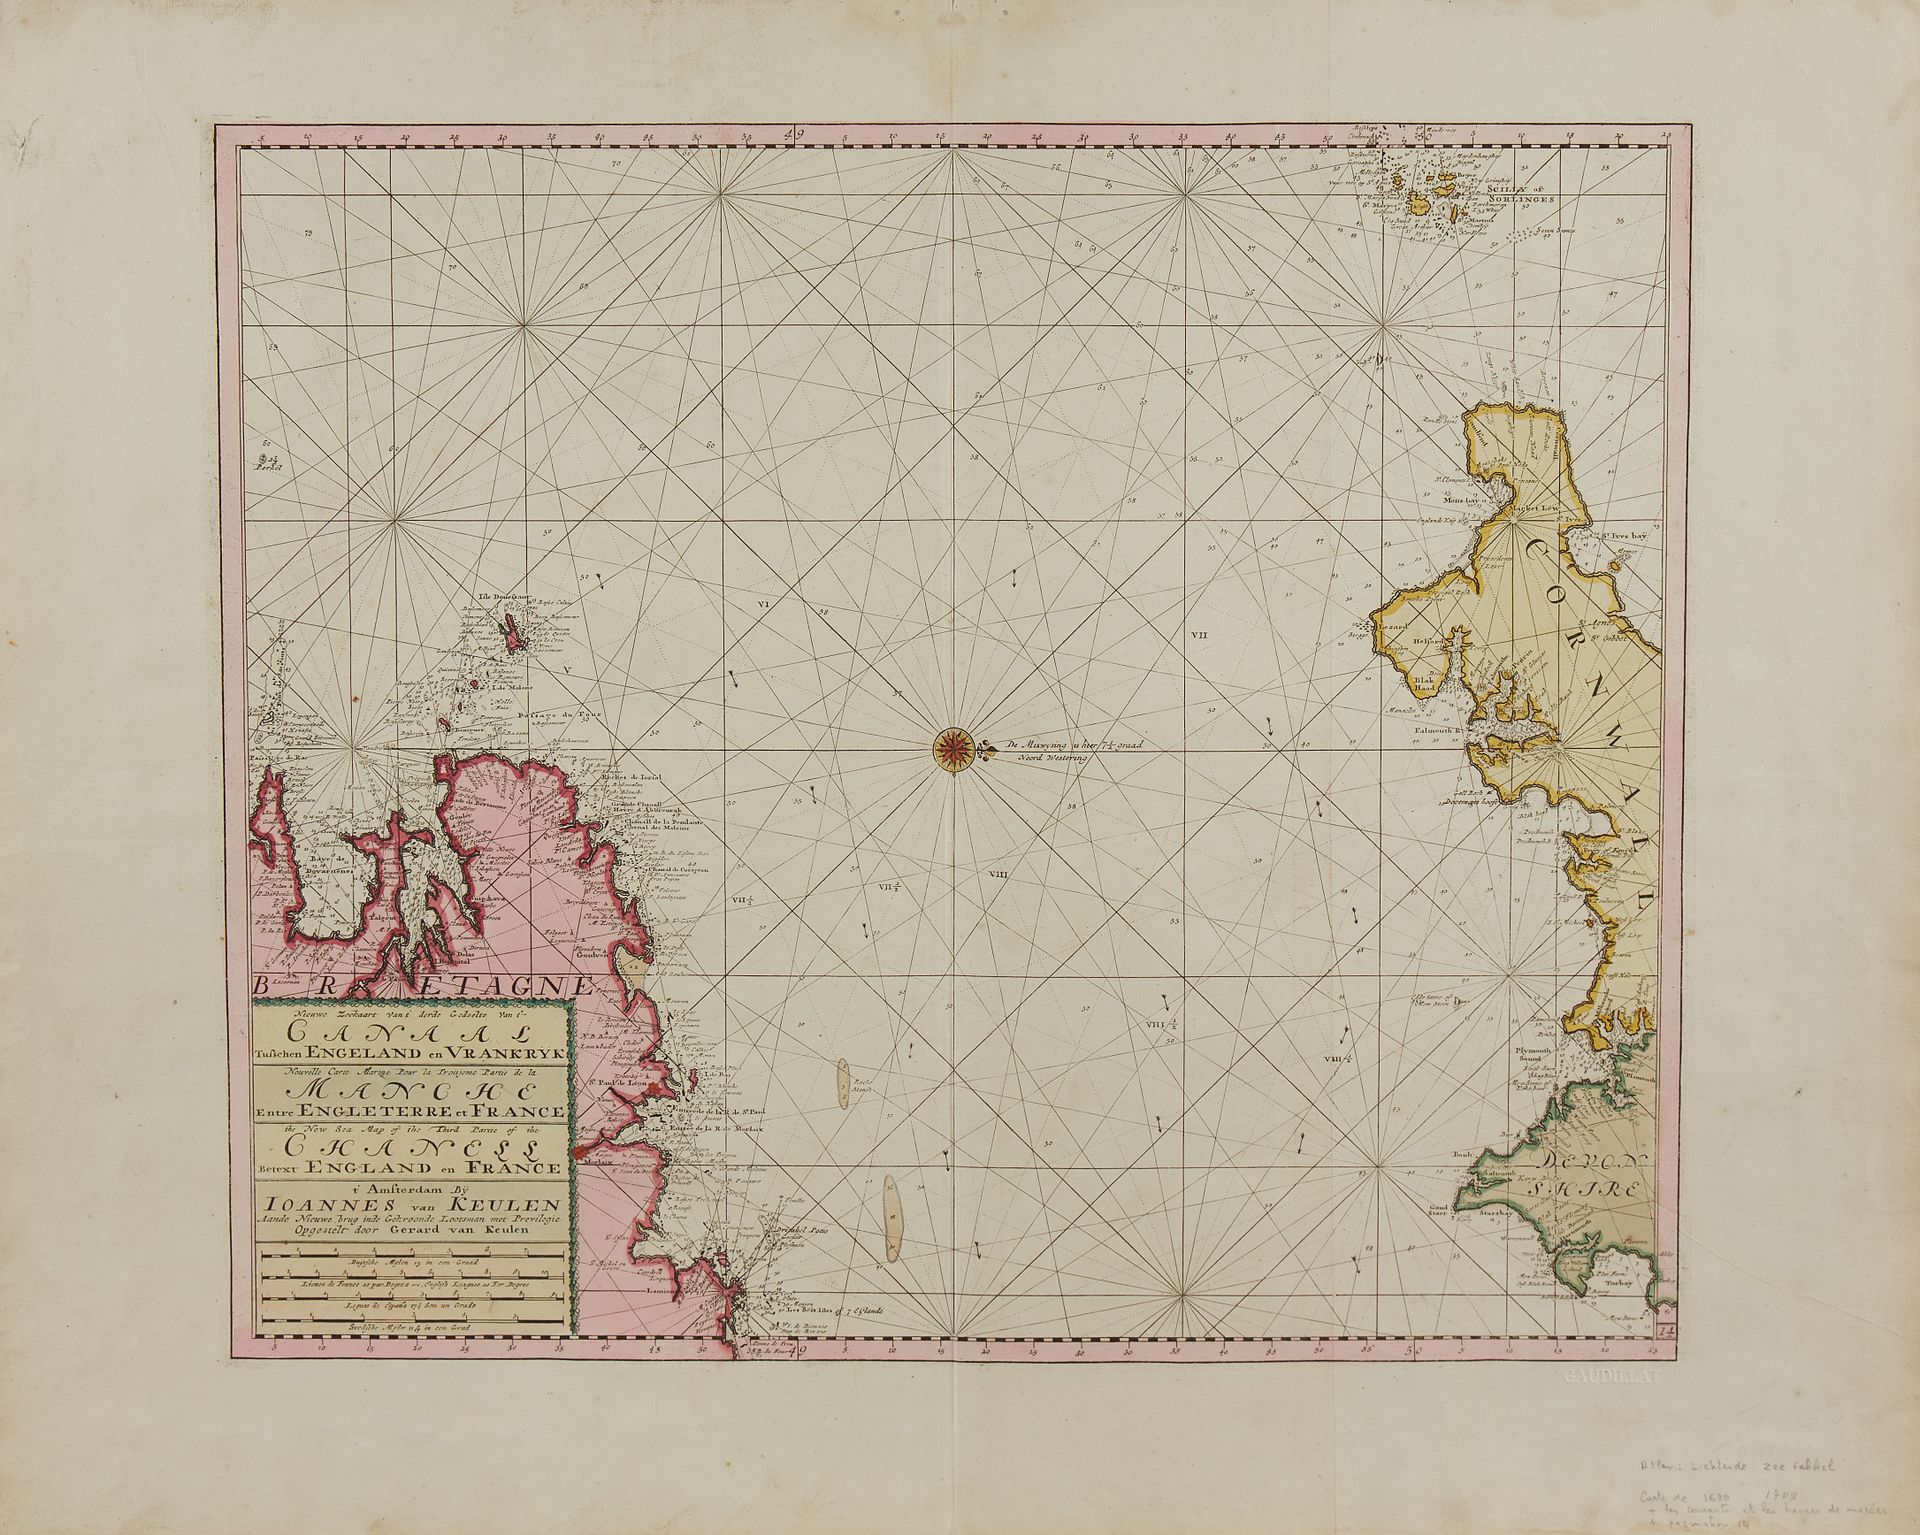 Null VAN KEULEN, J. New Nautical Chart for the Third Part of the Channel between&hellip;